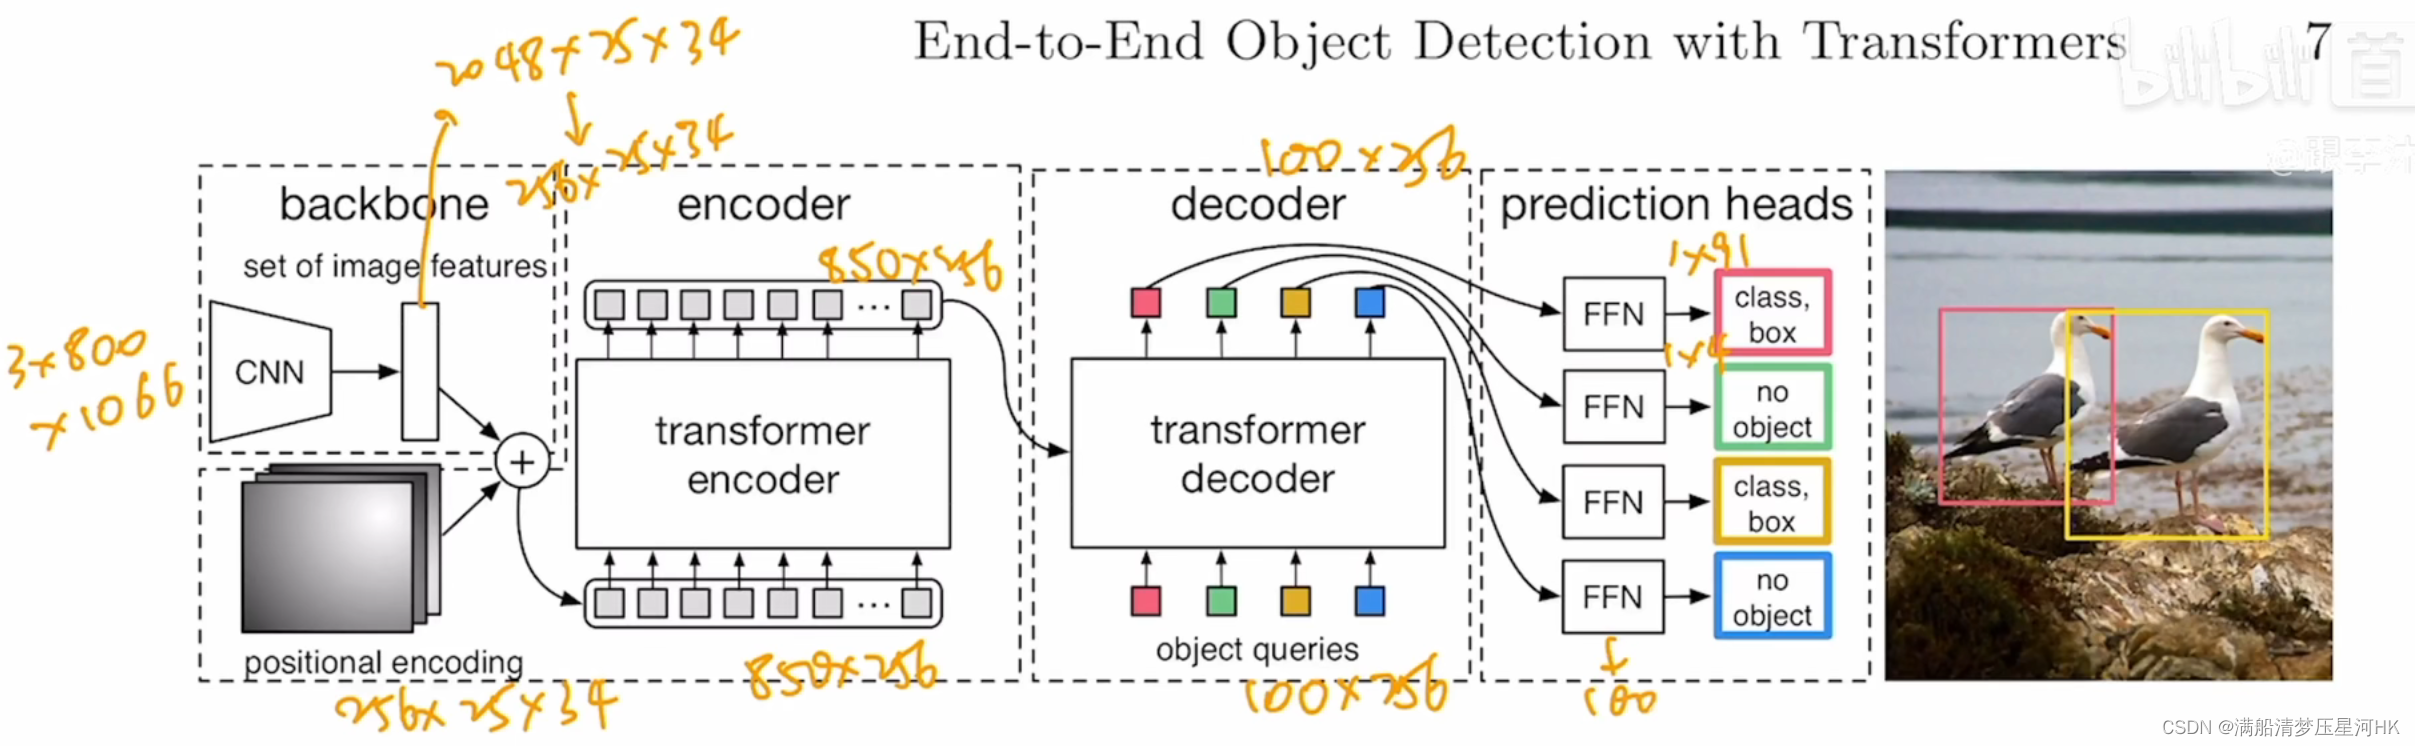 【DETR 论文解读】End-to-End Object Detection with Transformer